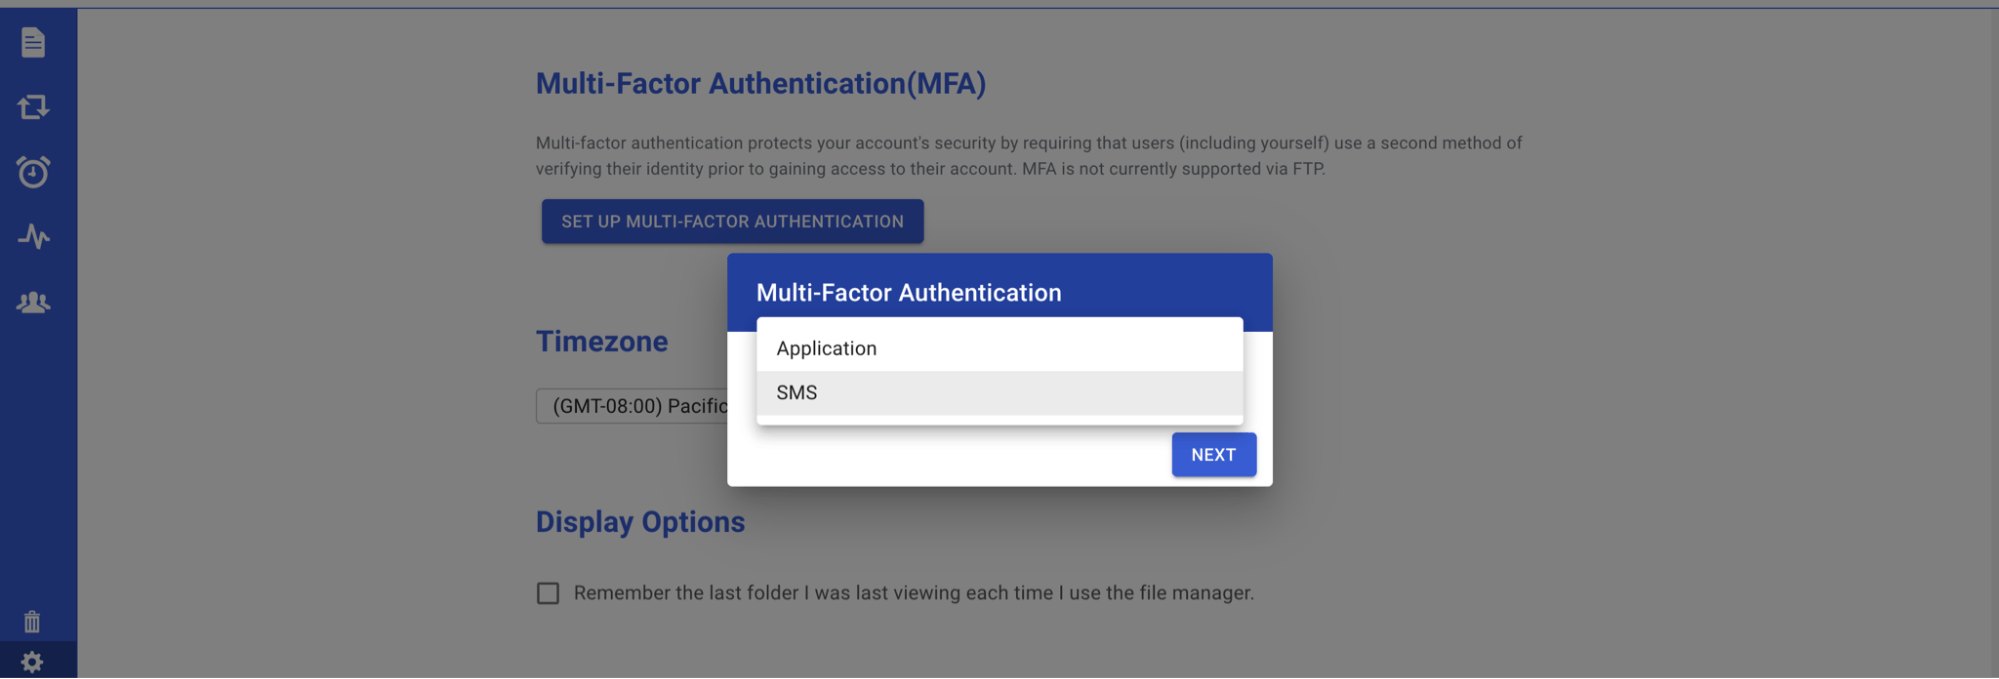 SMS option for multi-factor authentication.